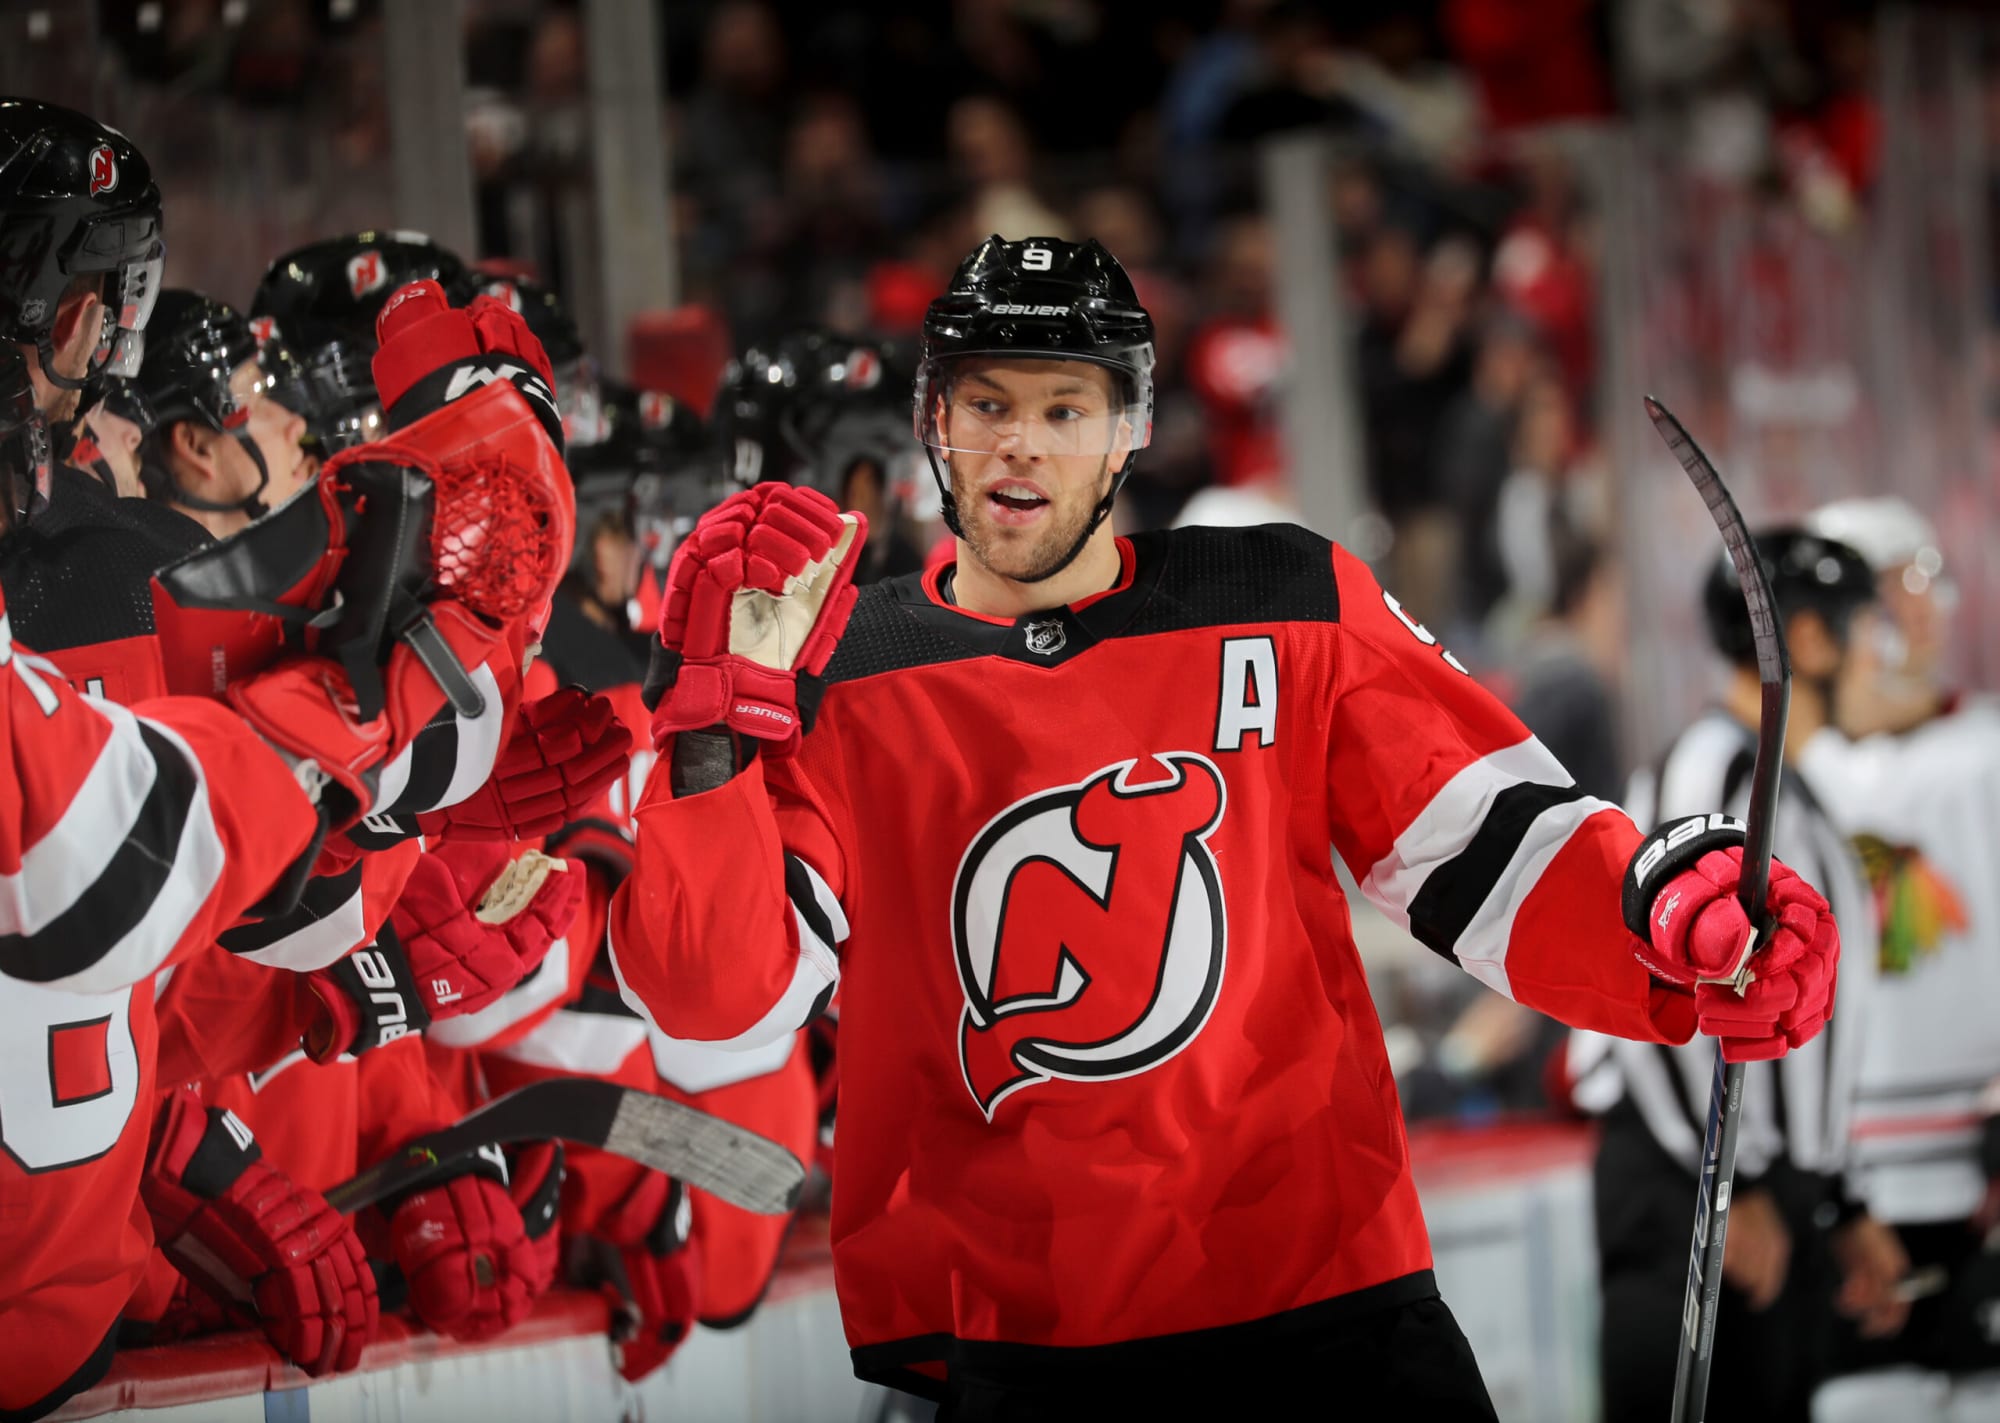 Devils' Taylor Hall extends point streak to 18 games